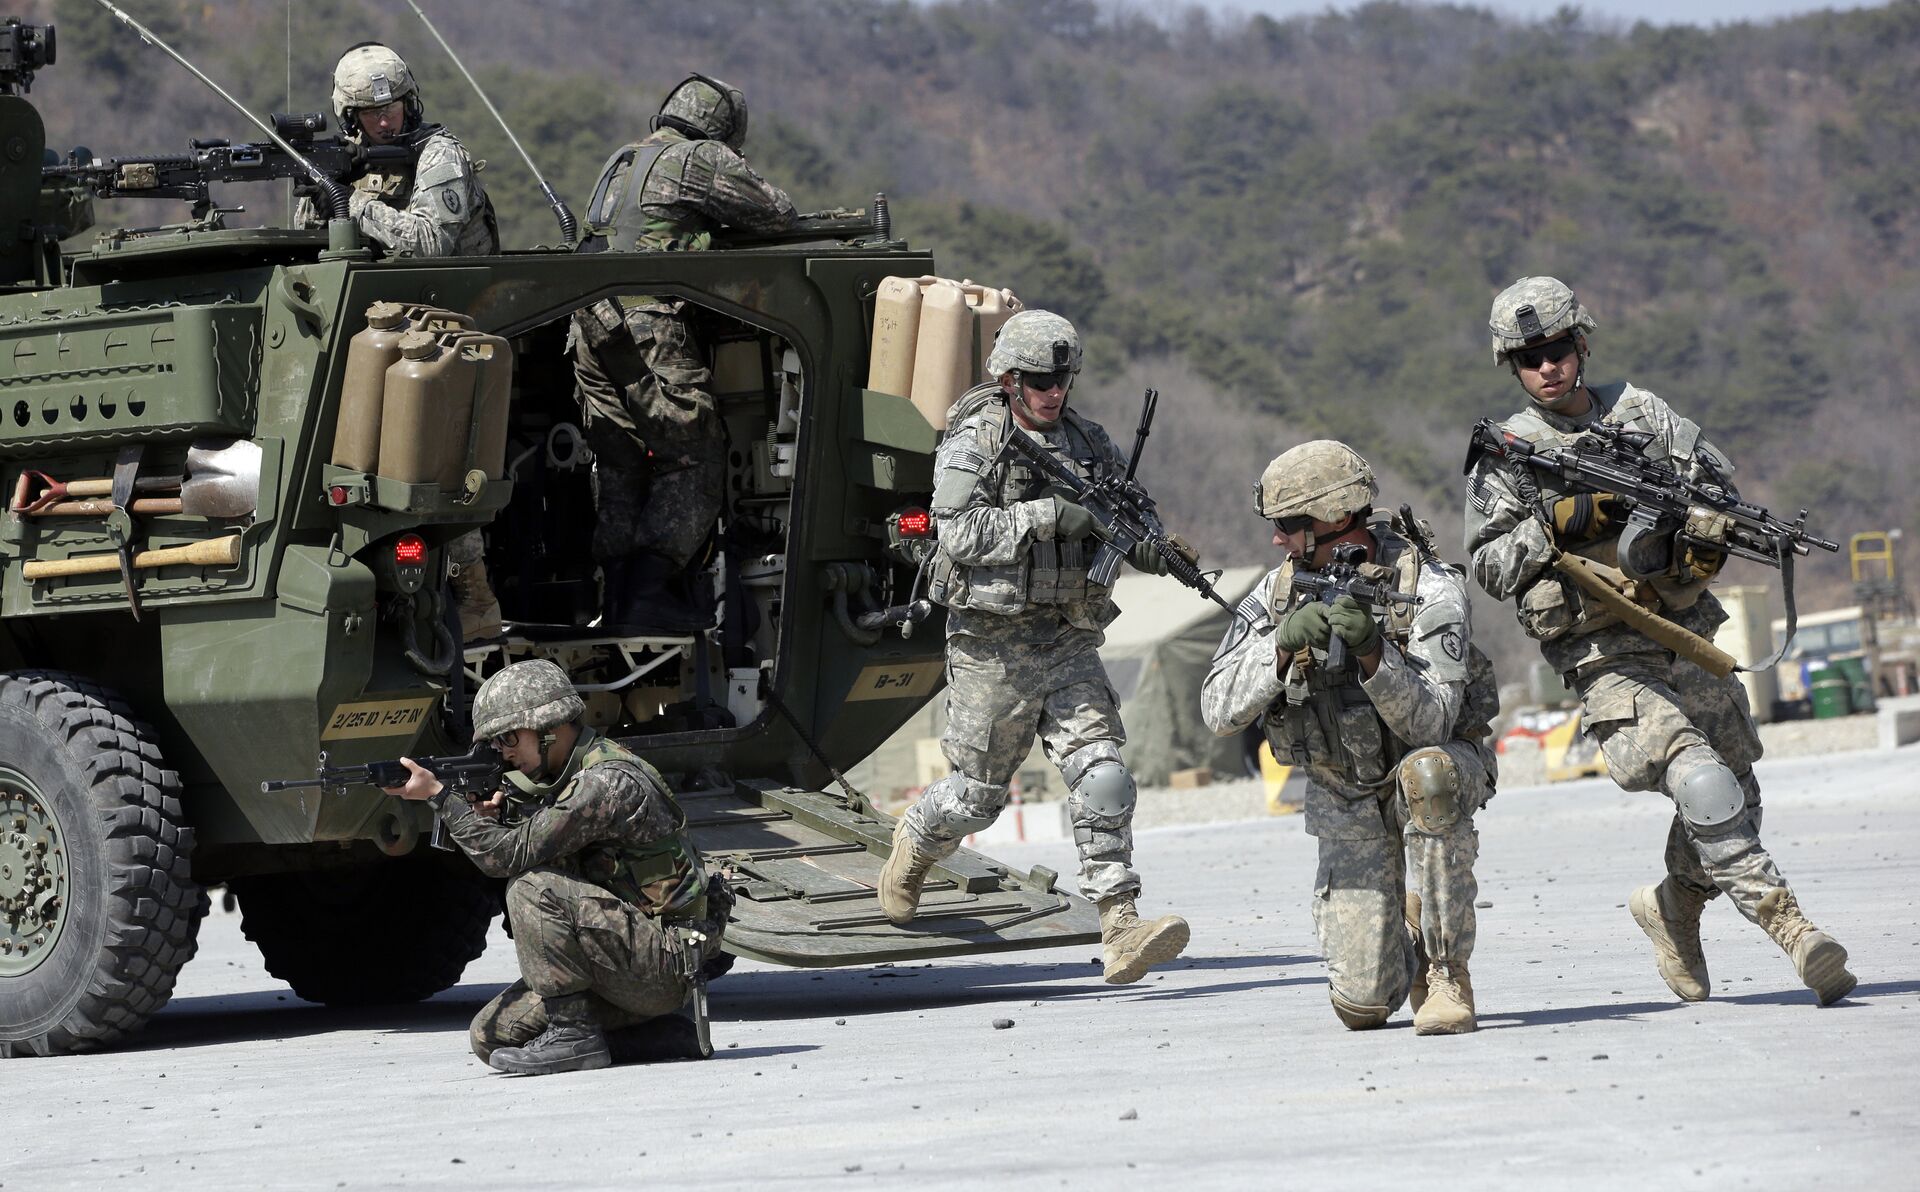 U.S. Army soldiers from the 25th Infantry Division’s 2nd Stryker Brigade Combat Team and South Korean soldiers take their position during a demonstration of the combined arms live-fire exercise as a part of the annual joint military exercise Foal Eagle between South Korea and the United States at the Rodriquez Multi-Purpose Range Complex in Pocheon, north of Seoul, South Korea. (File) - Sputnik International, 1920, 26.12.2023